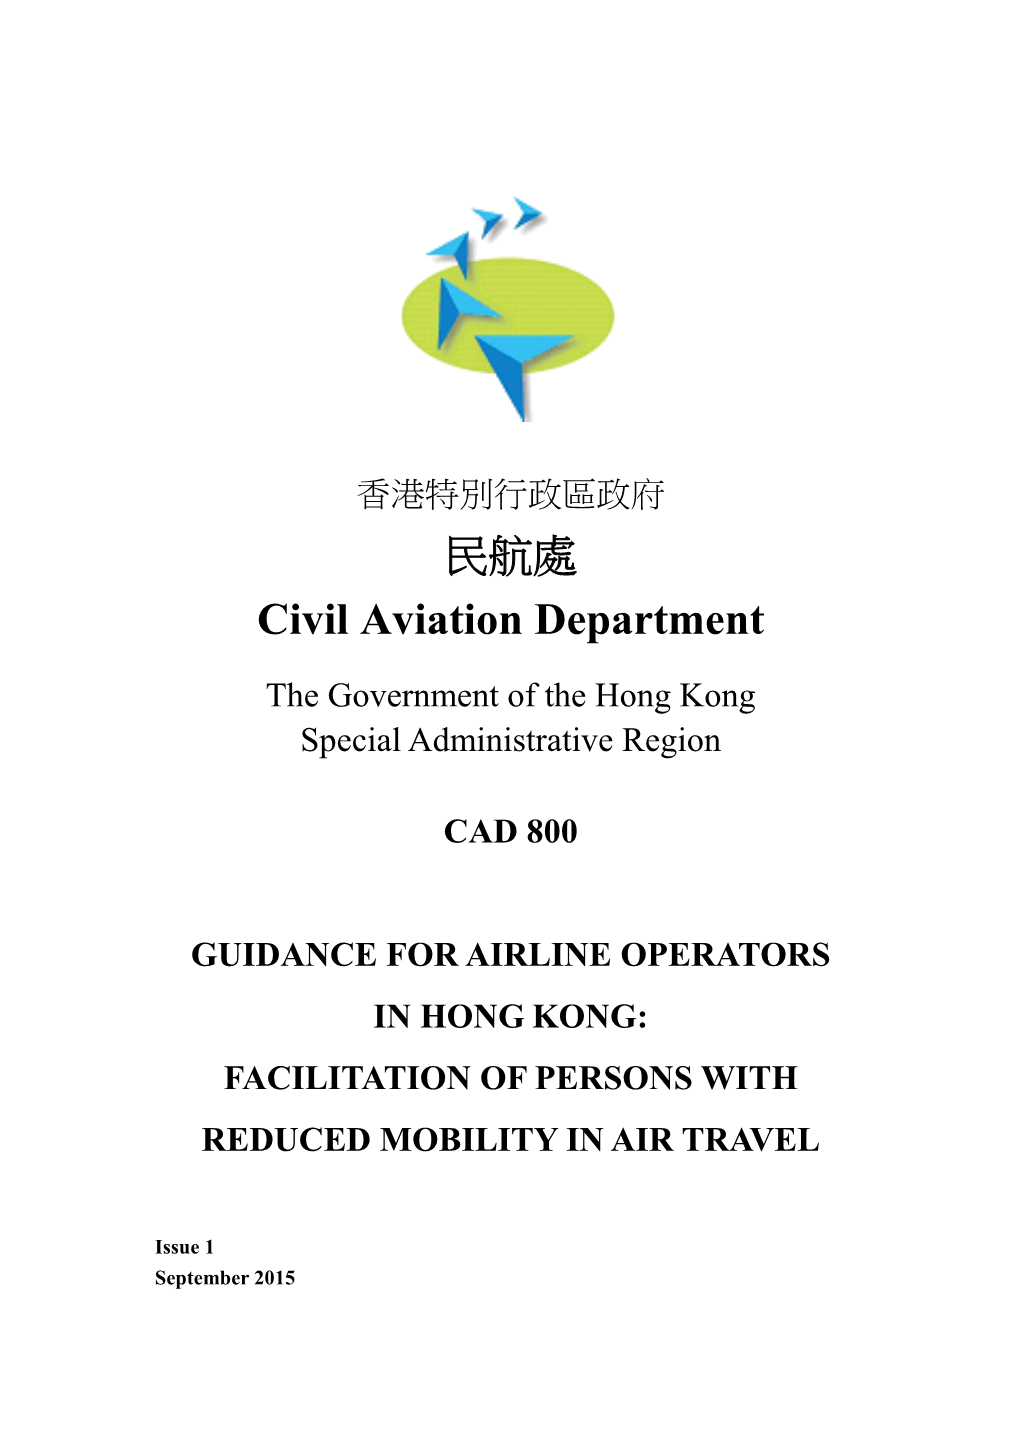 Guidance for Airline Operators in Hong Kong: Facilitation of Persons with Reduced Mobility in Air Travel